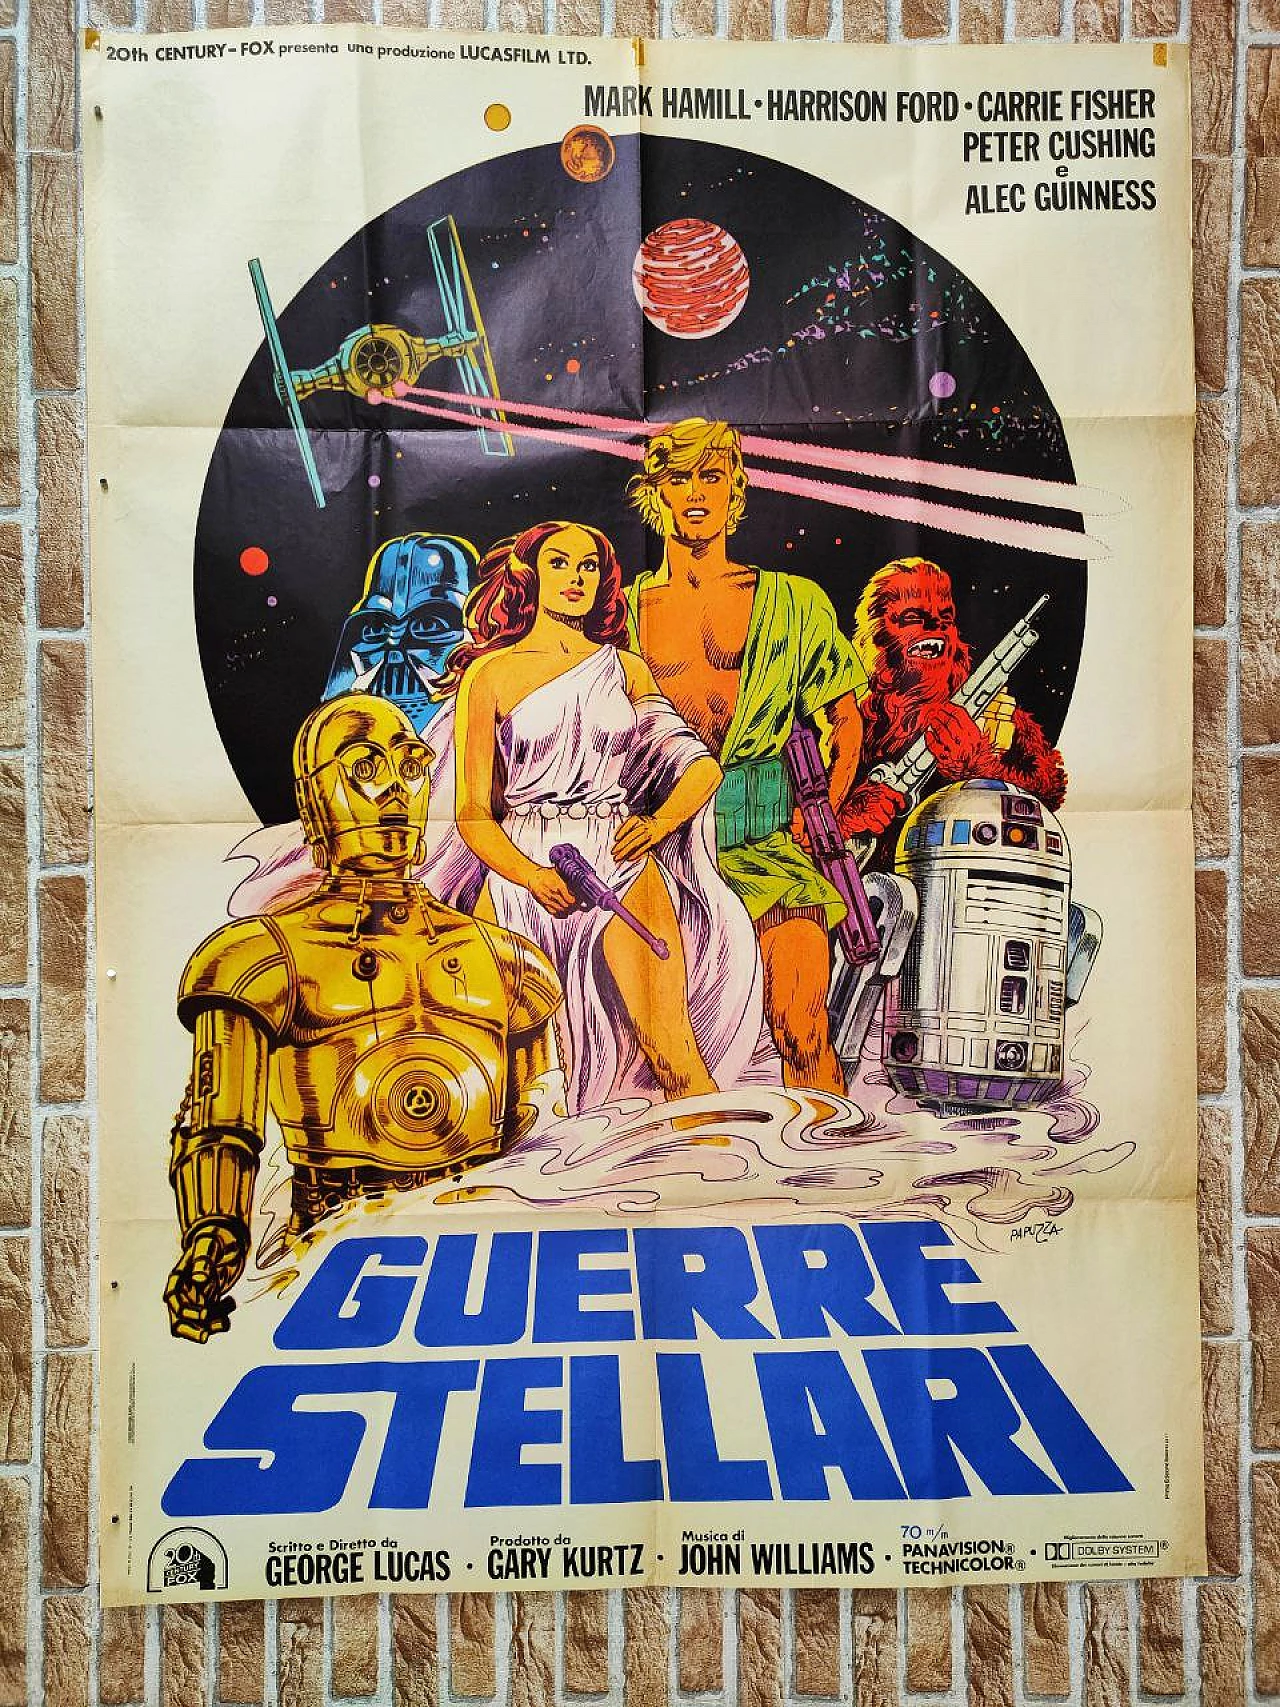 Movie poster for Star Wars, 1977 1